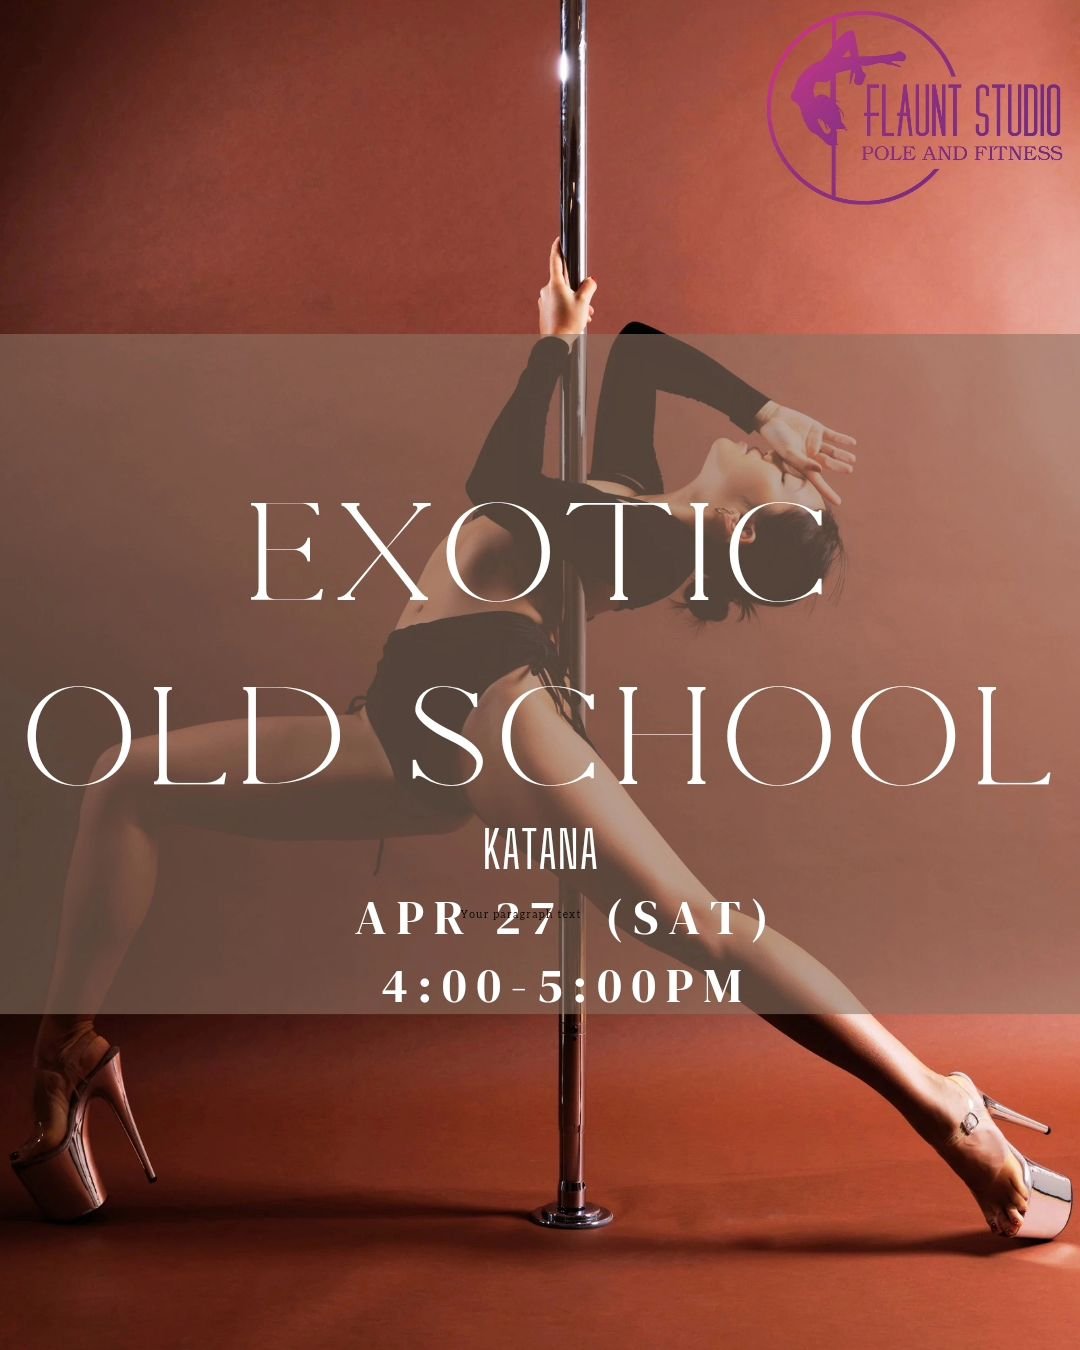 🌟 Meet 𝕂𝔸𝕋𝔸ℕ𝔸  our newest Exotic dance sensation 👠👠, bringing her expertise all the way from Vancouver 🇨🇦🇨🇦 to Hong Kong! 💃✨🇭🇰🇭🇰 @___

Katana discovered her love for Exotic dance in 2018 and has since become a dedicated teacher speci